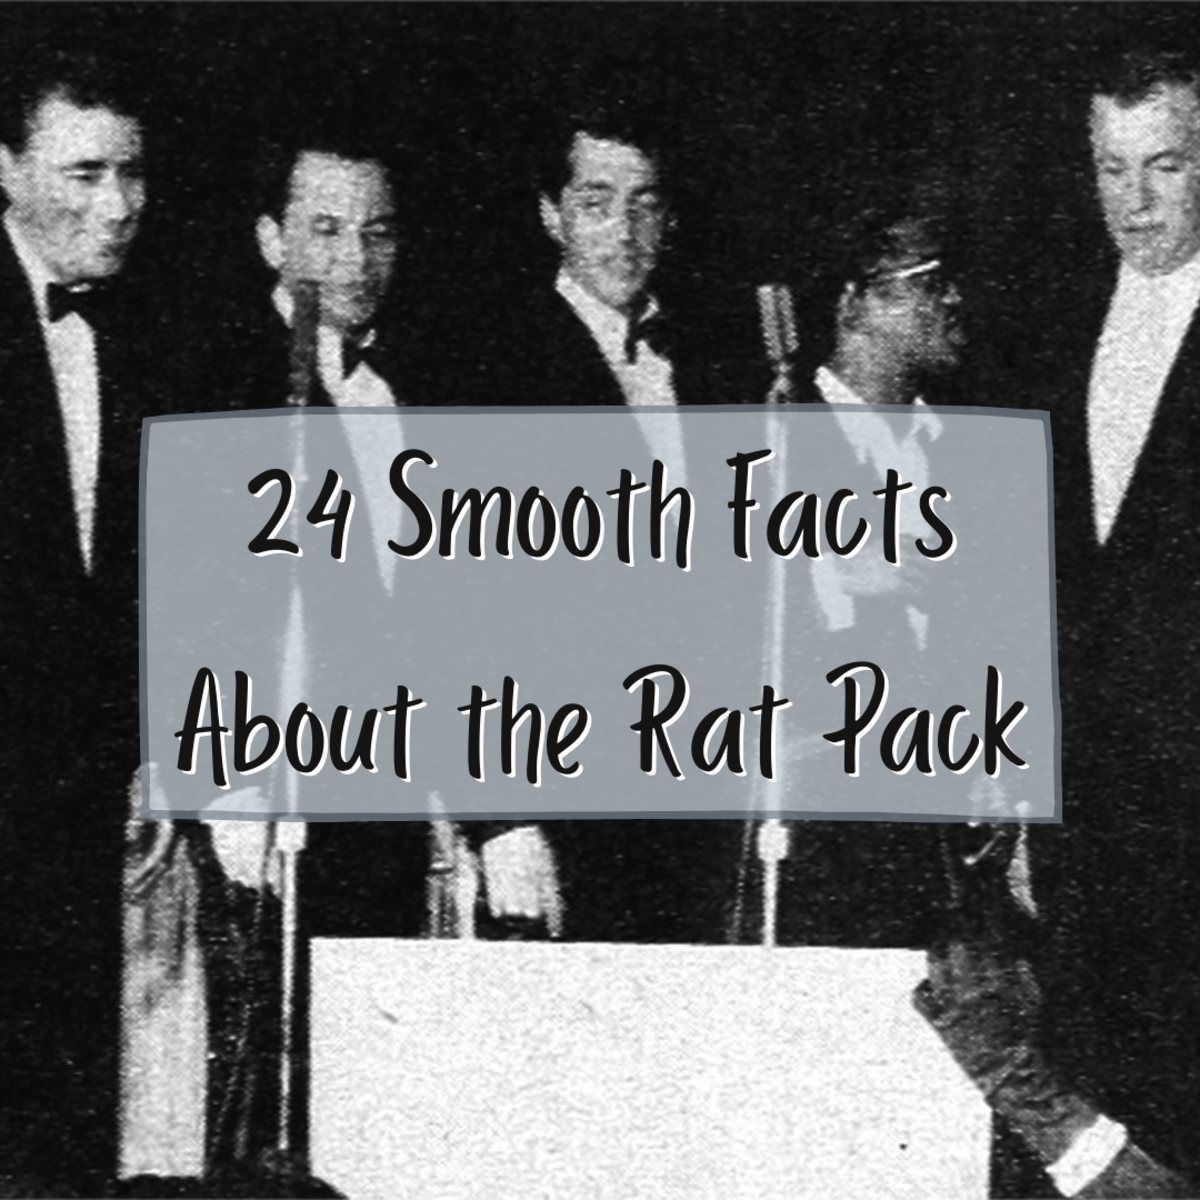 24 Smooth Facts About the Rat Pack